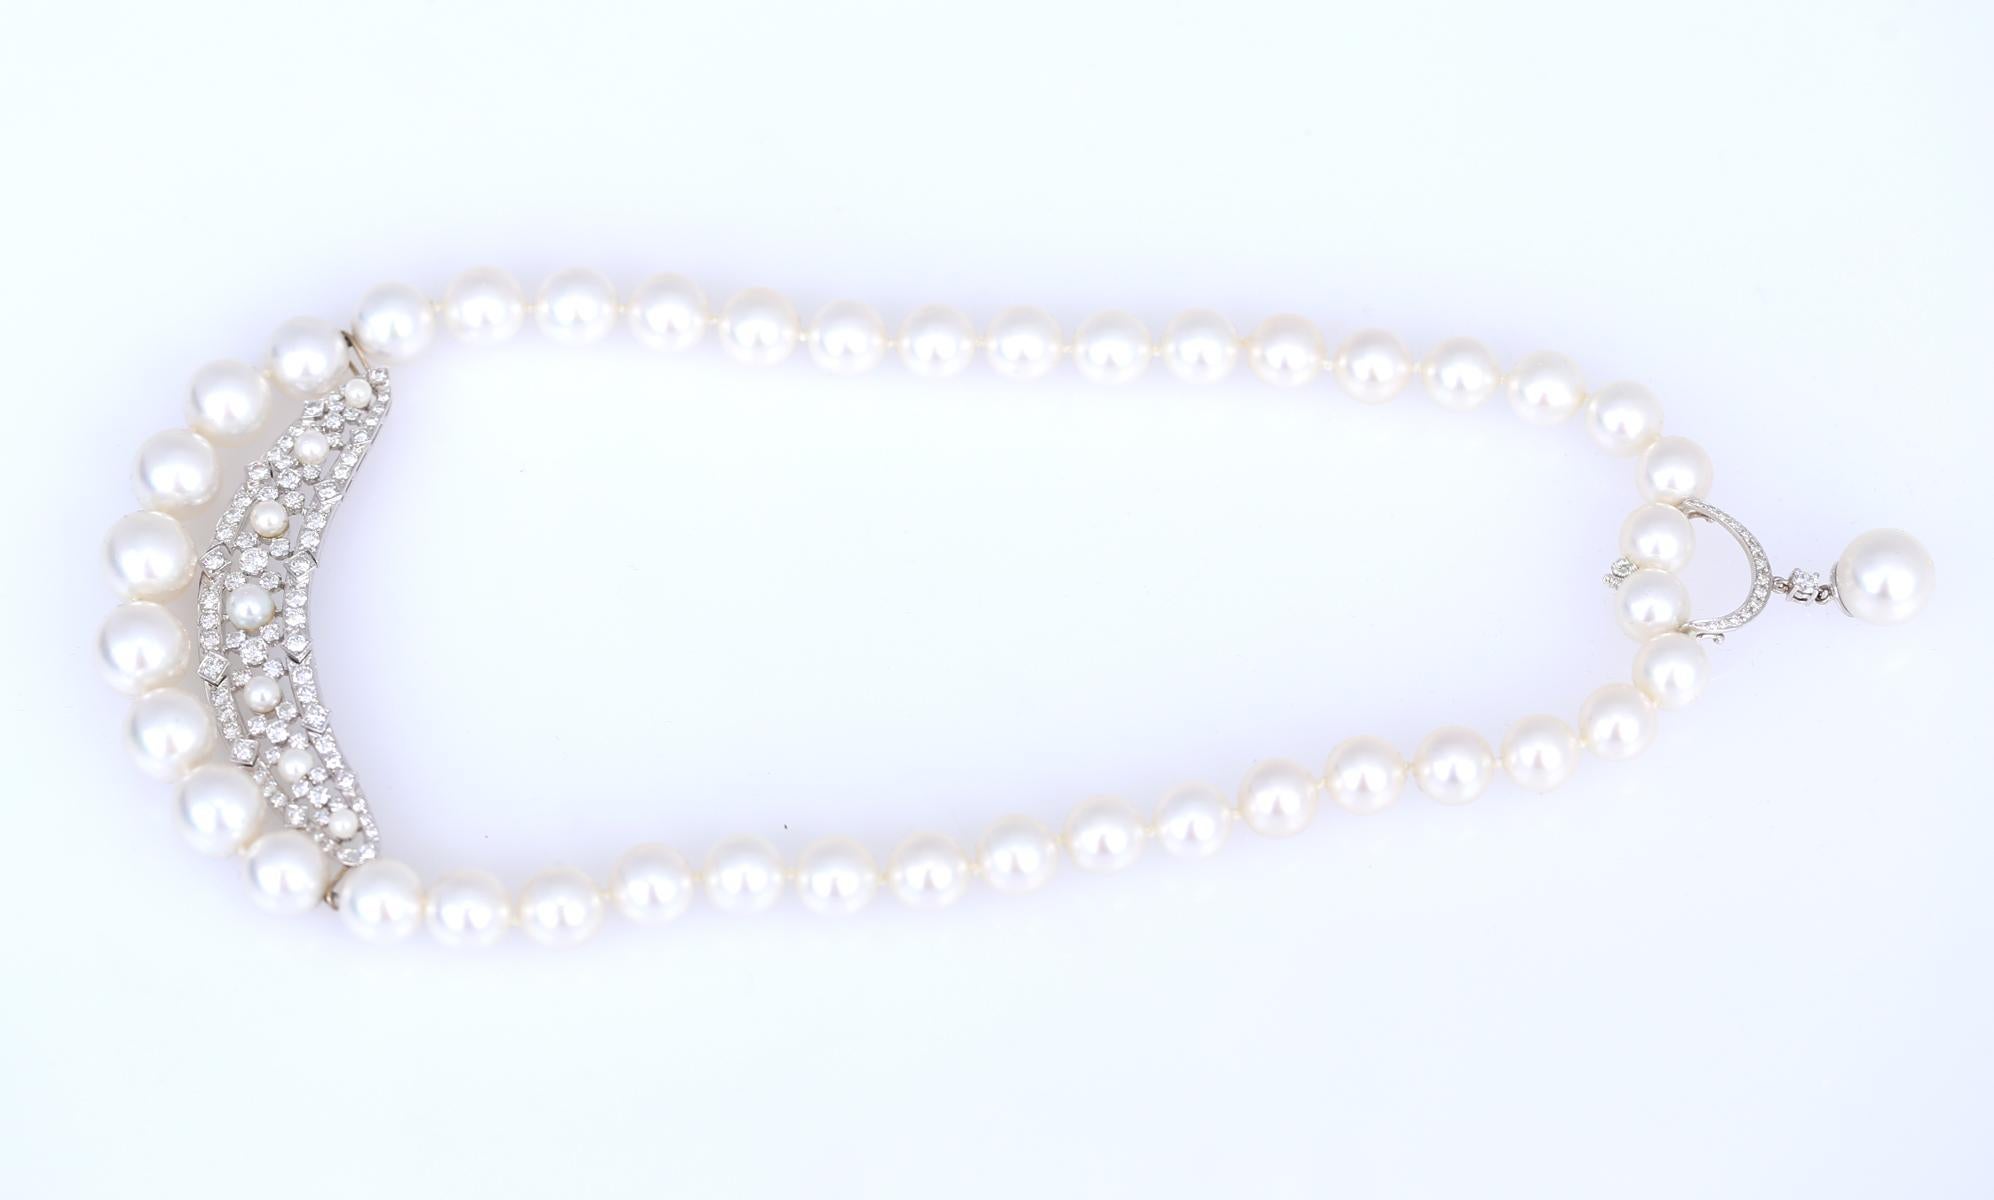 Pearls Diamonds 2.5 Carat Necklace AAA Quality, 2020 For Sale 4